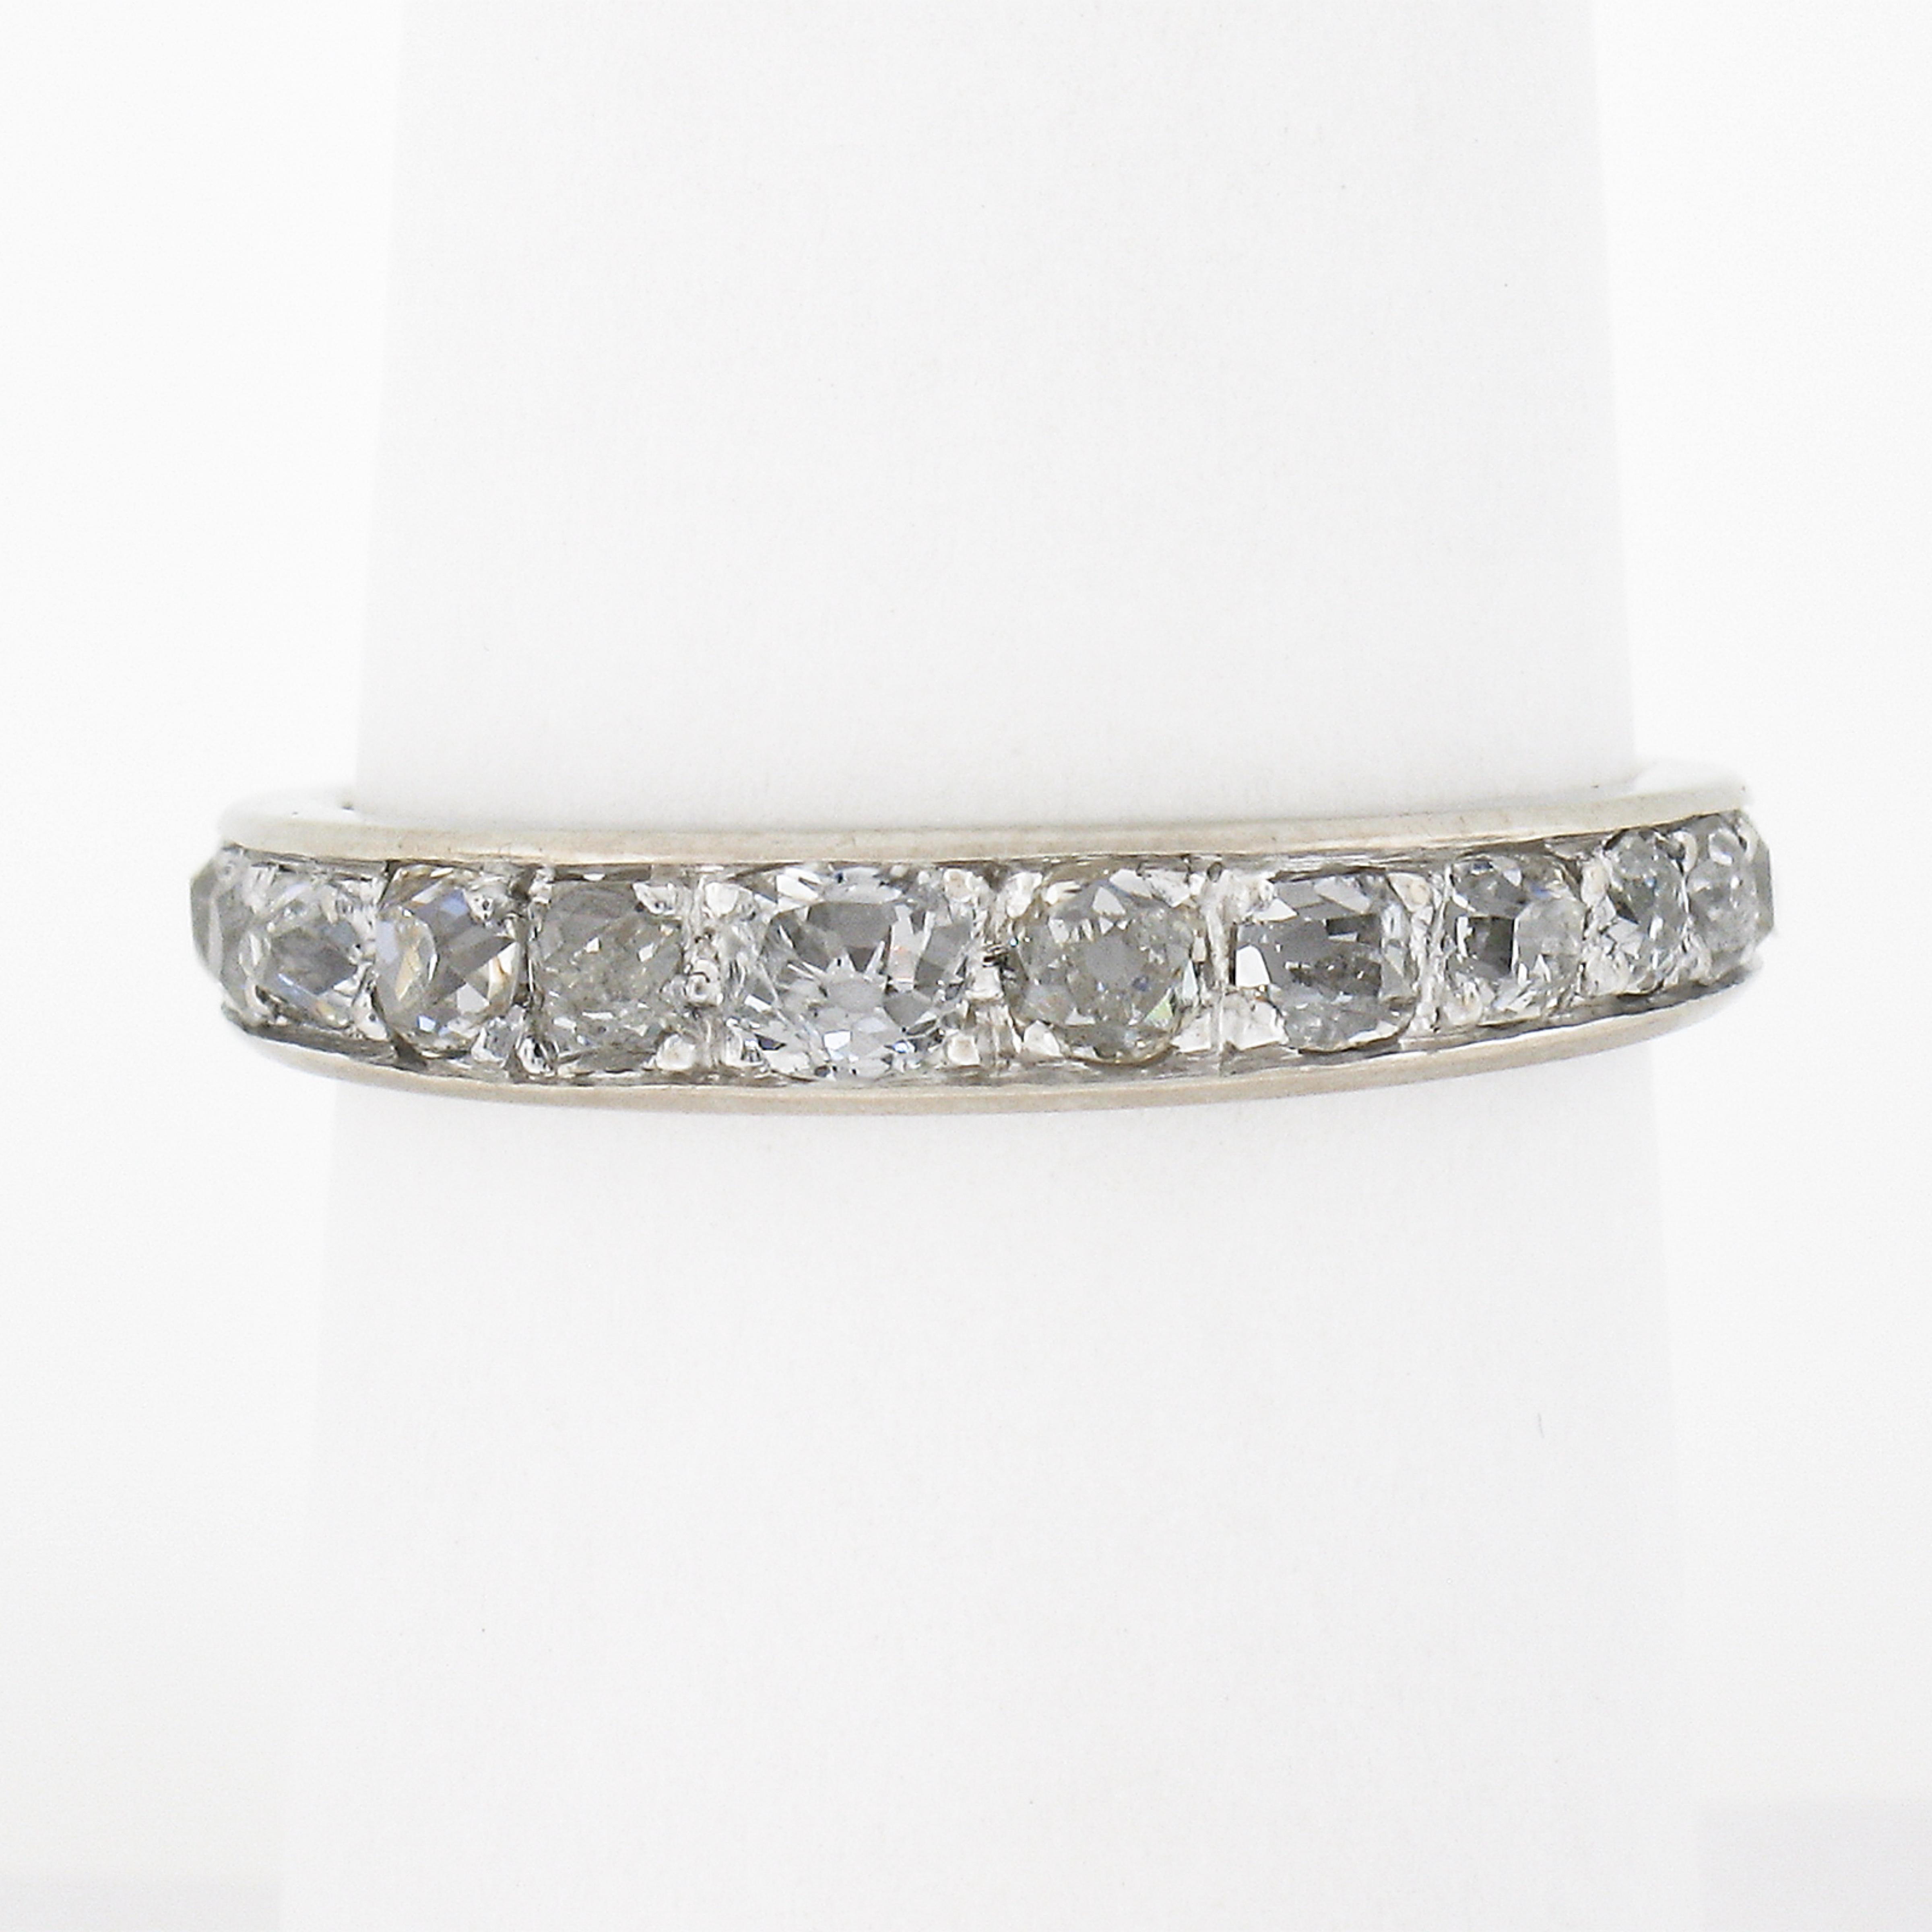 This gorgeous antique diamond eternity band ring was crafted in France from solid 18k white gold during the Edwardian period. It features a simply beautiful design that carries fine and fiery old mine and old rose cut diamonds that graduate in size